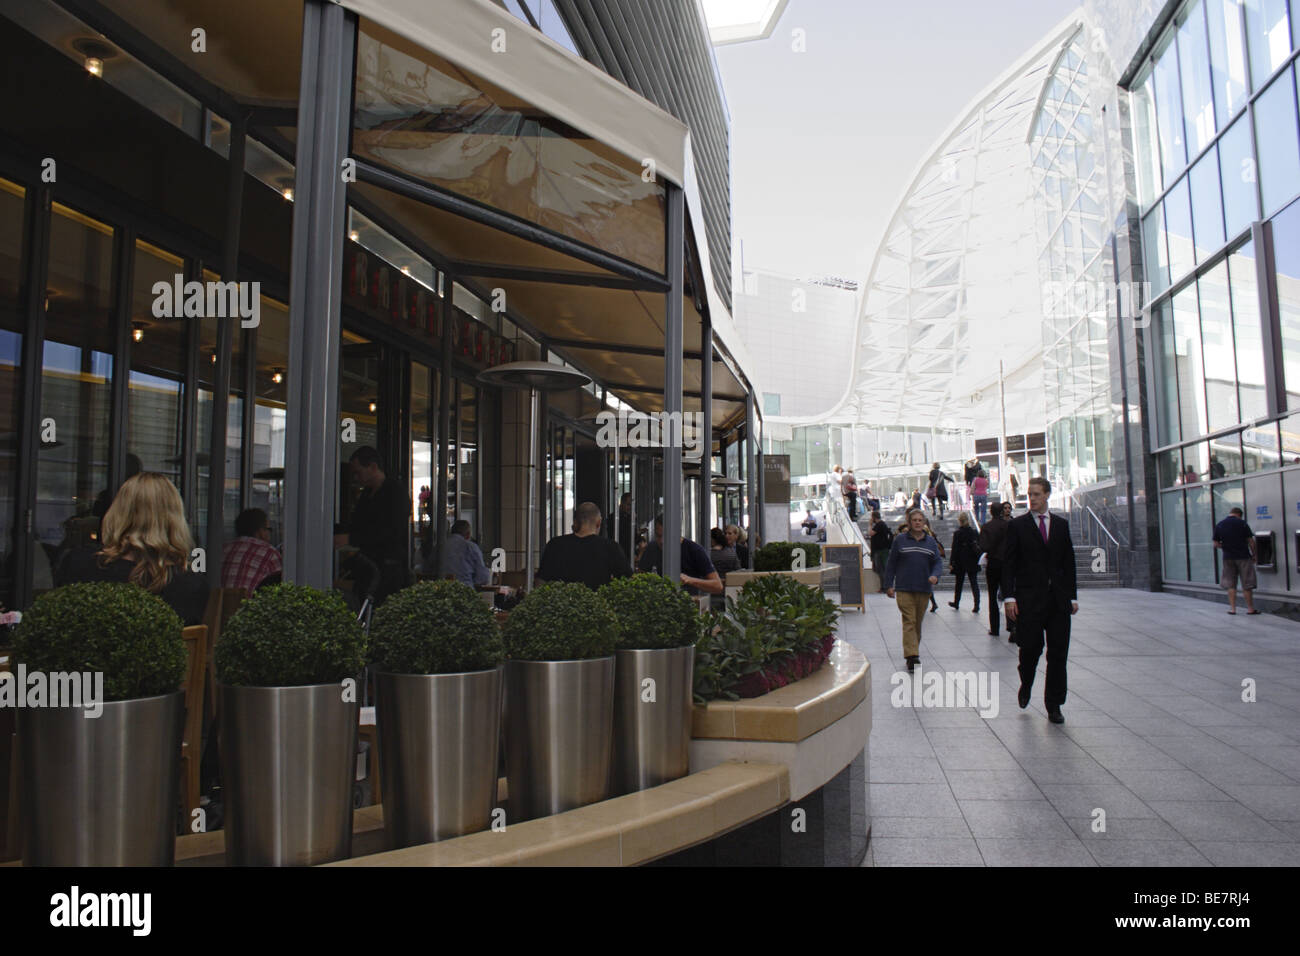 Restaurant at Westfield shopping Centre London 2009 Stock Photo